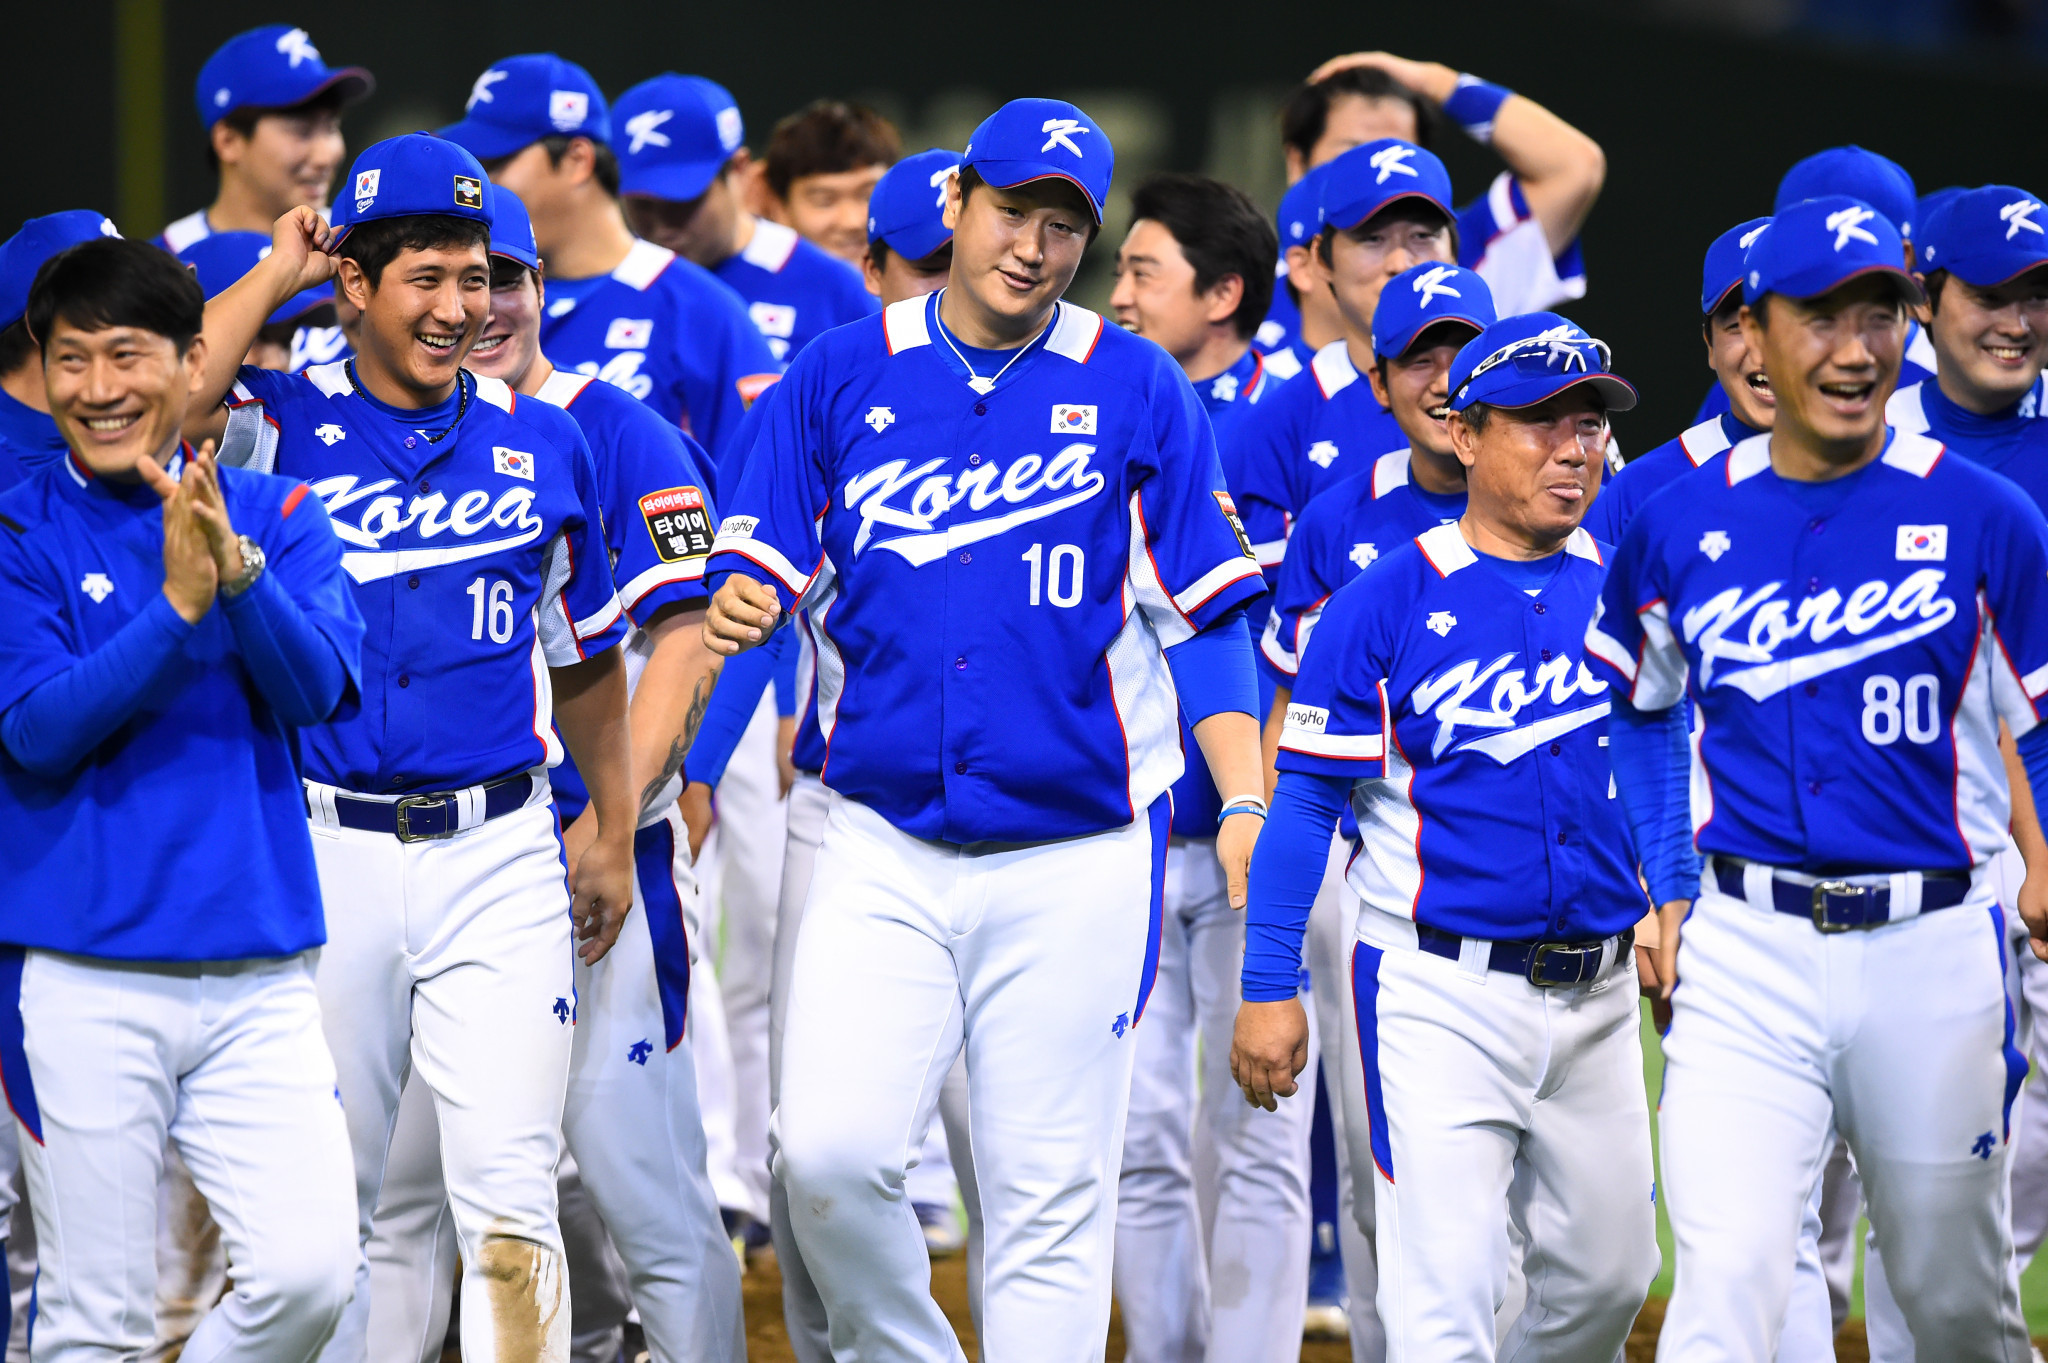 Woo-chan Cha helped South Korea win the inaugural WBSC Premier 12 tournament ©Getty Images